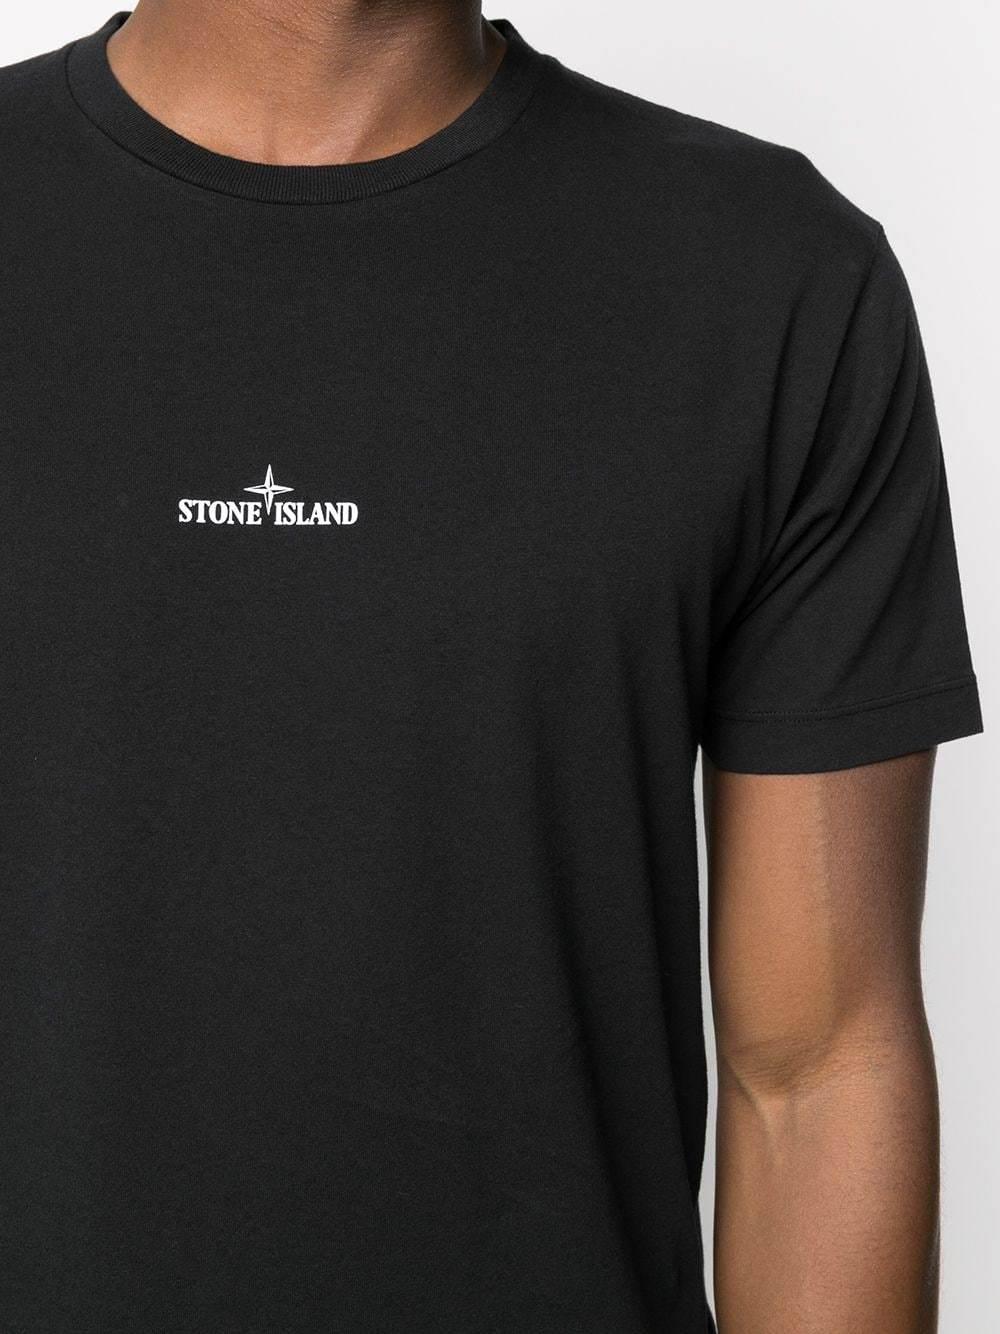 Stone Island Cotton Back Marble One Print T-shirt Black for Men | Lyst